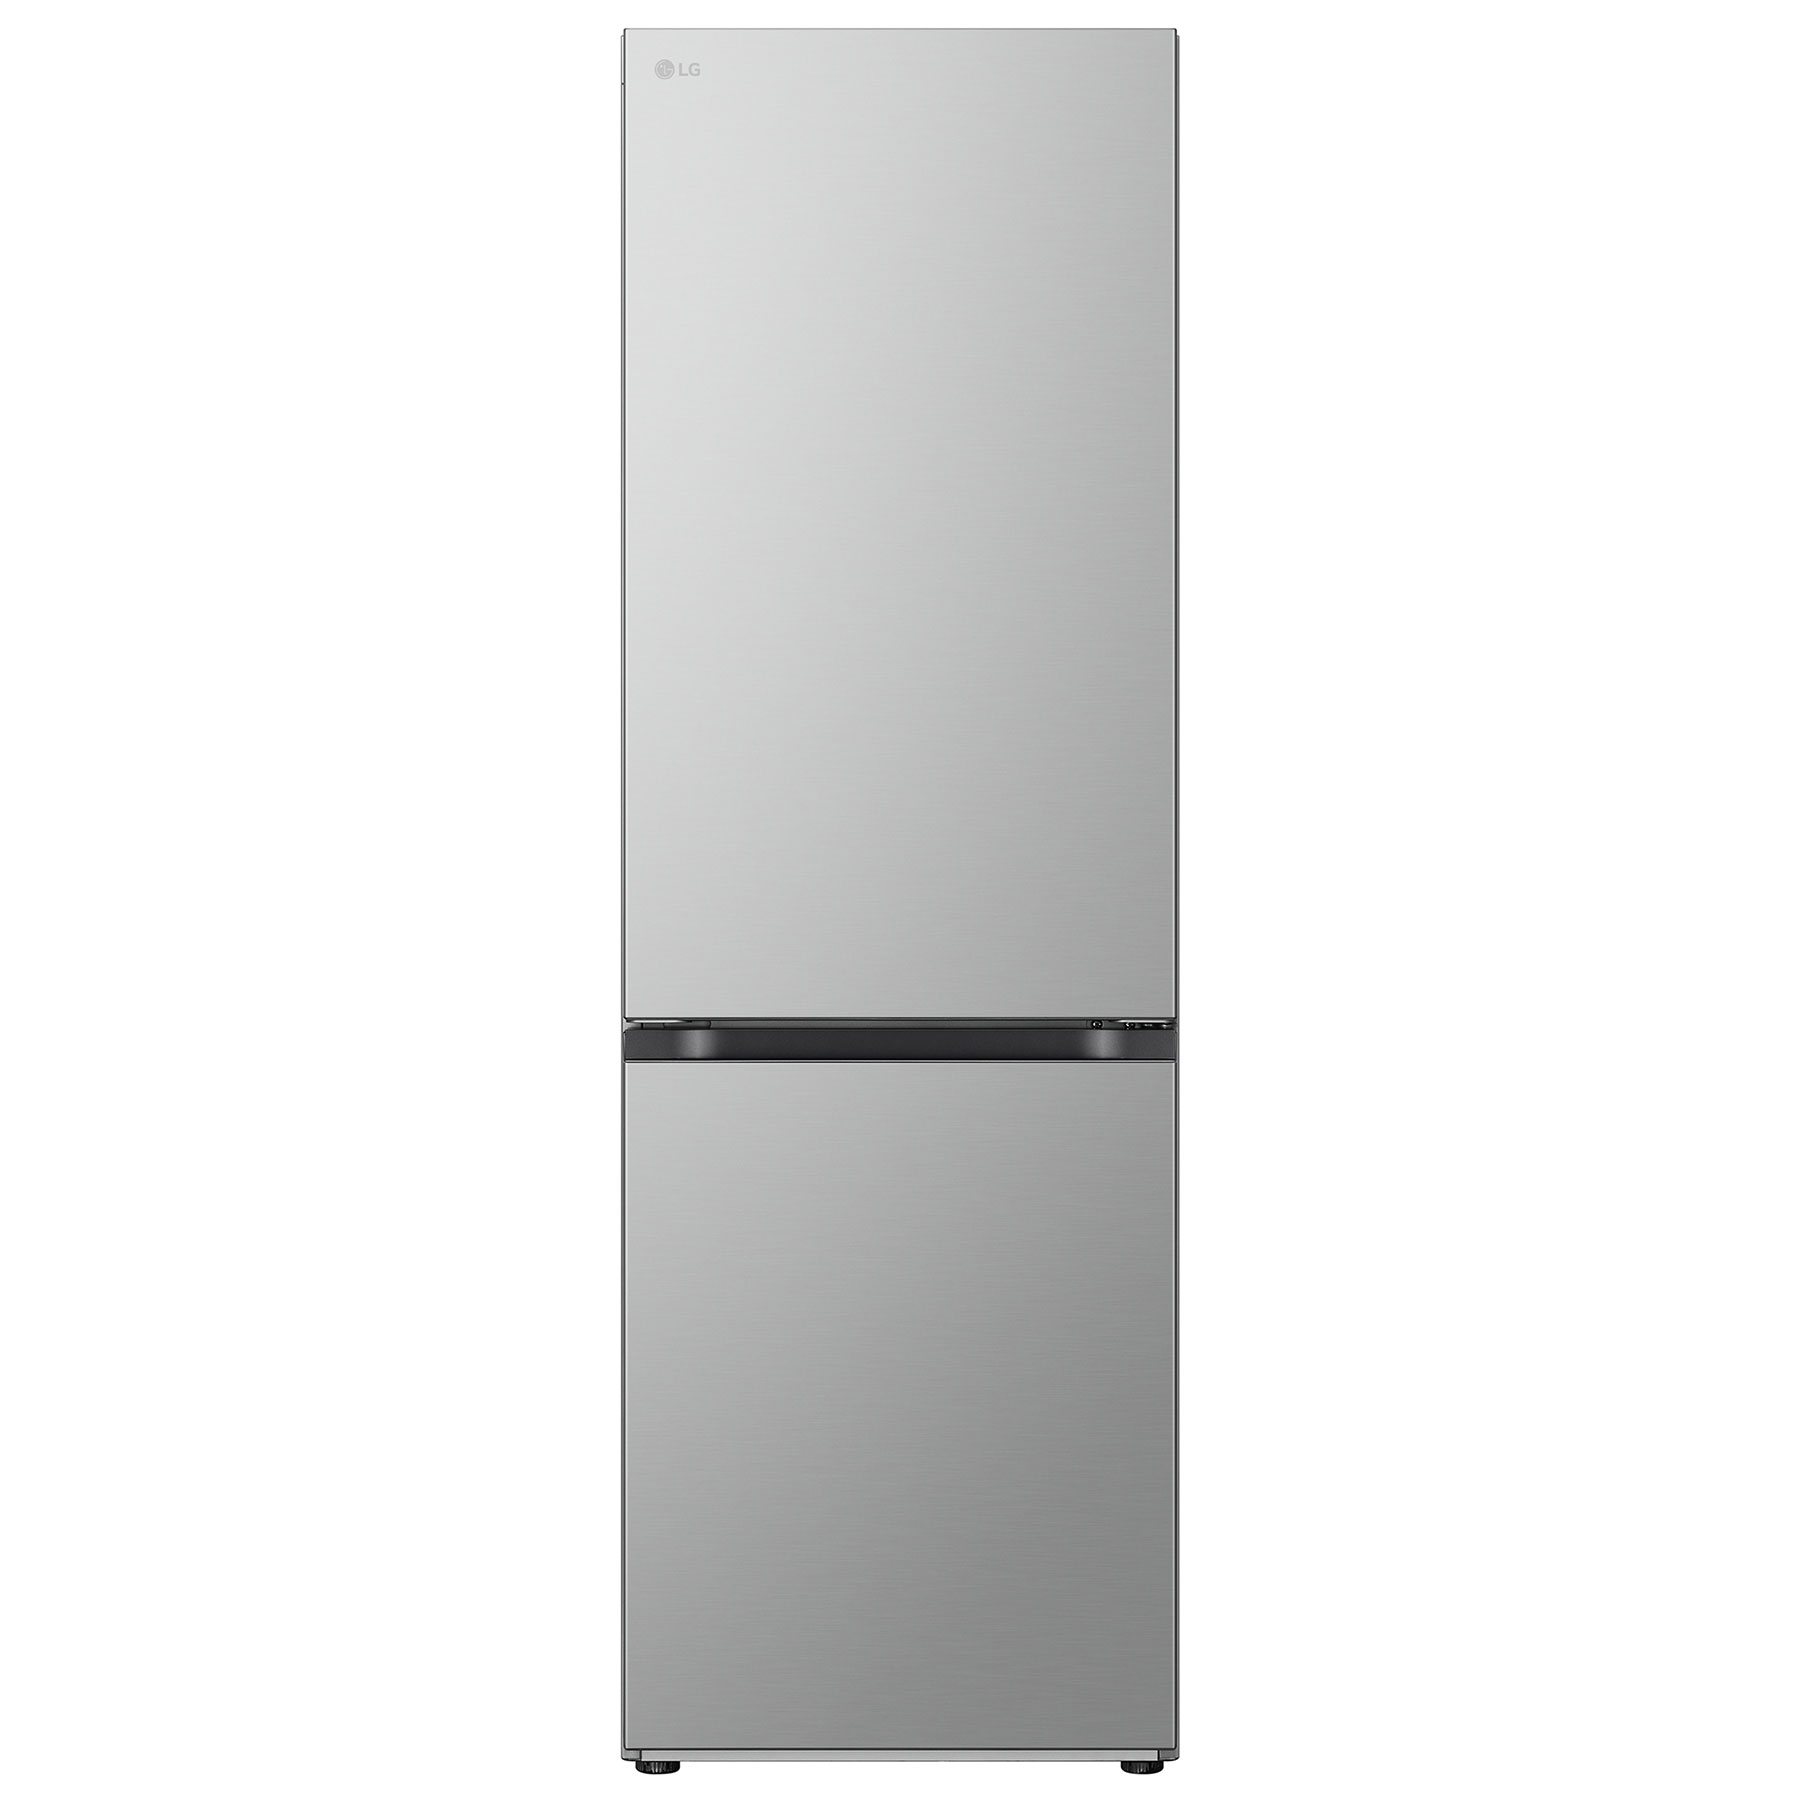 Image of LG GBV3100DPY 60cm Frost Free Fridge Freezer in Silver 1 86m D Rated